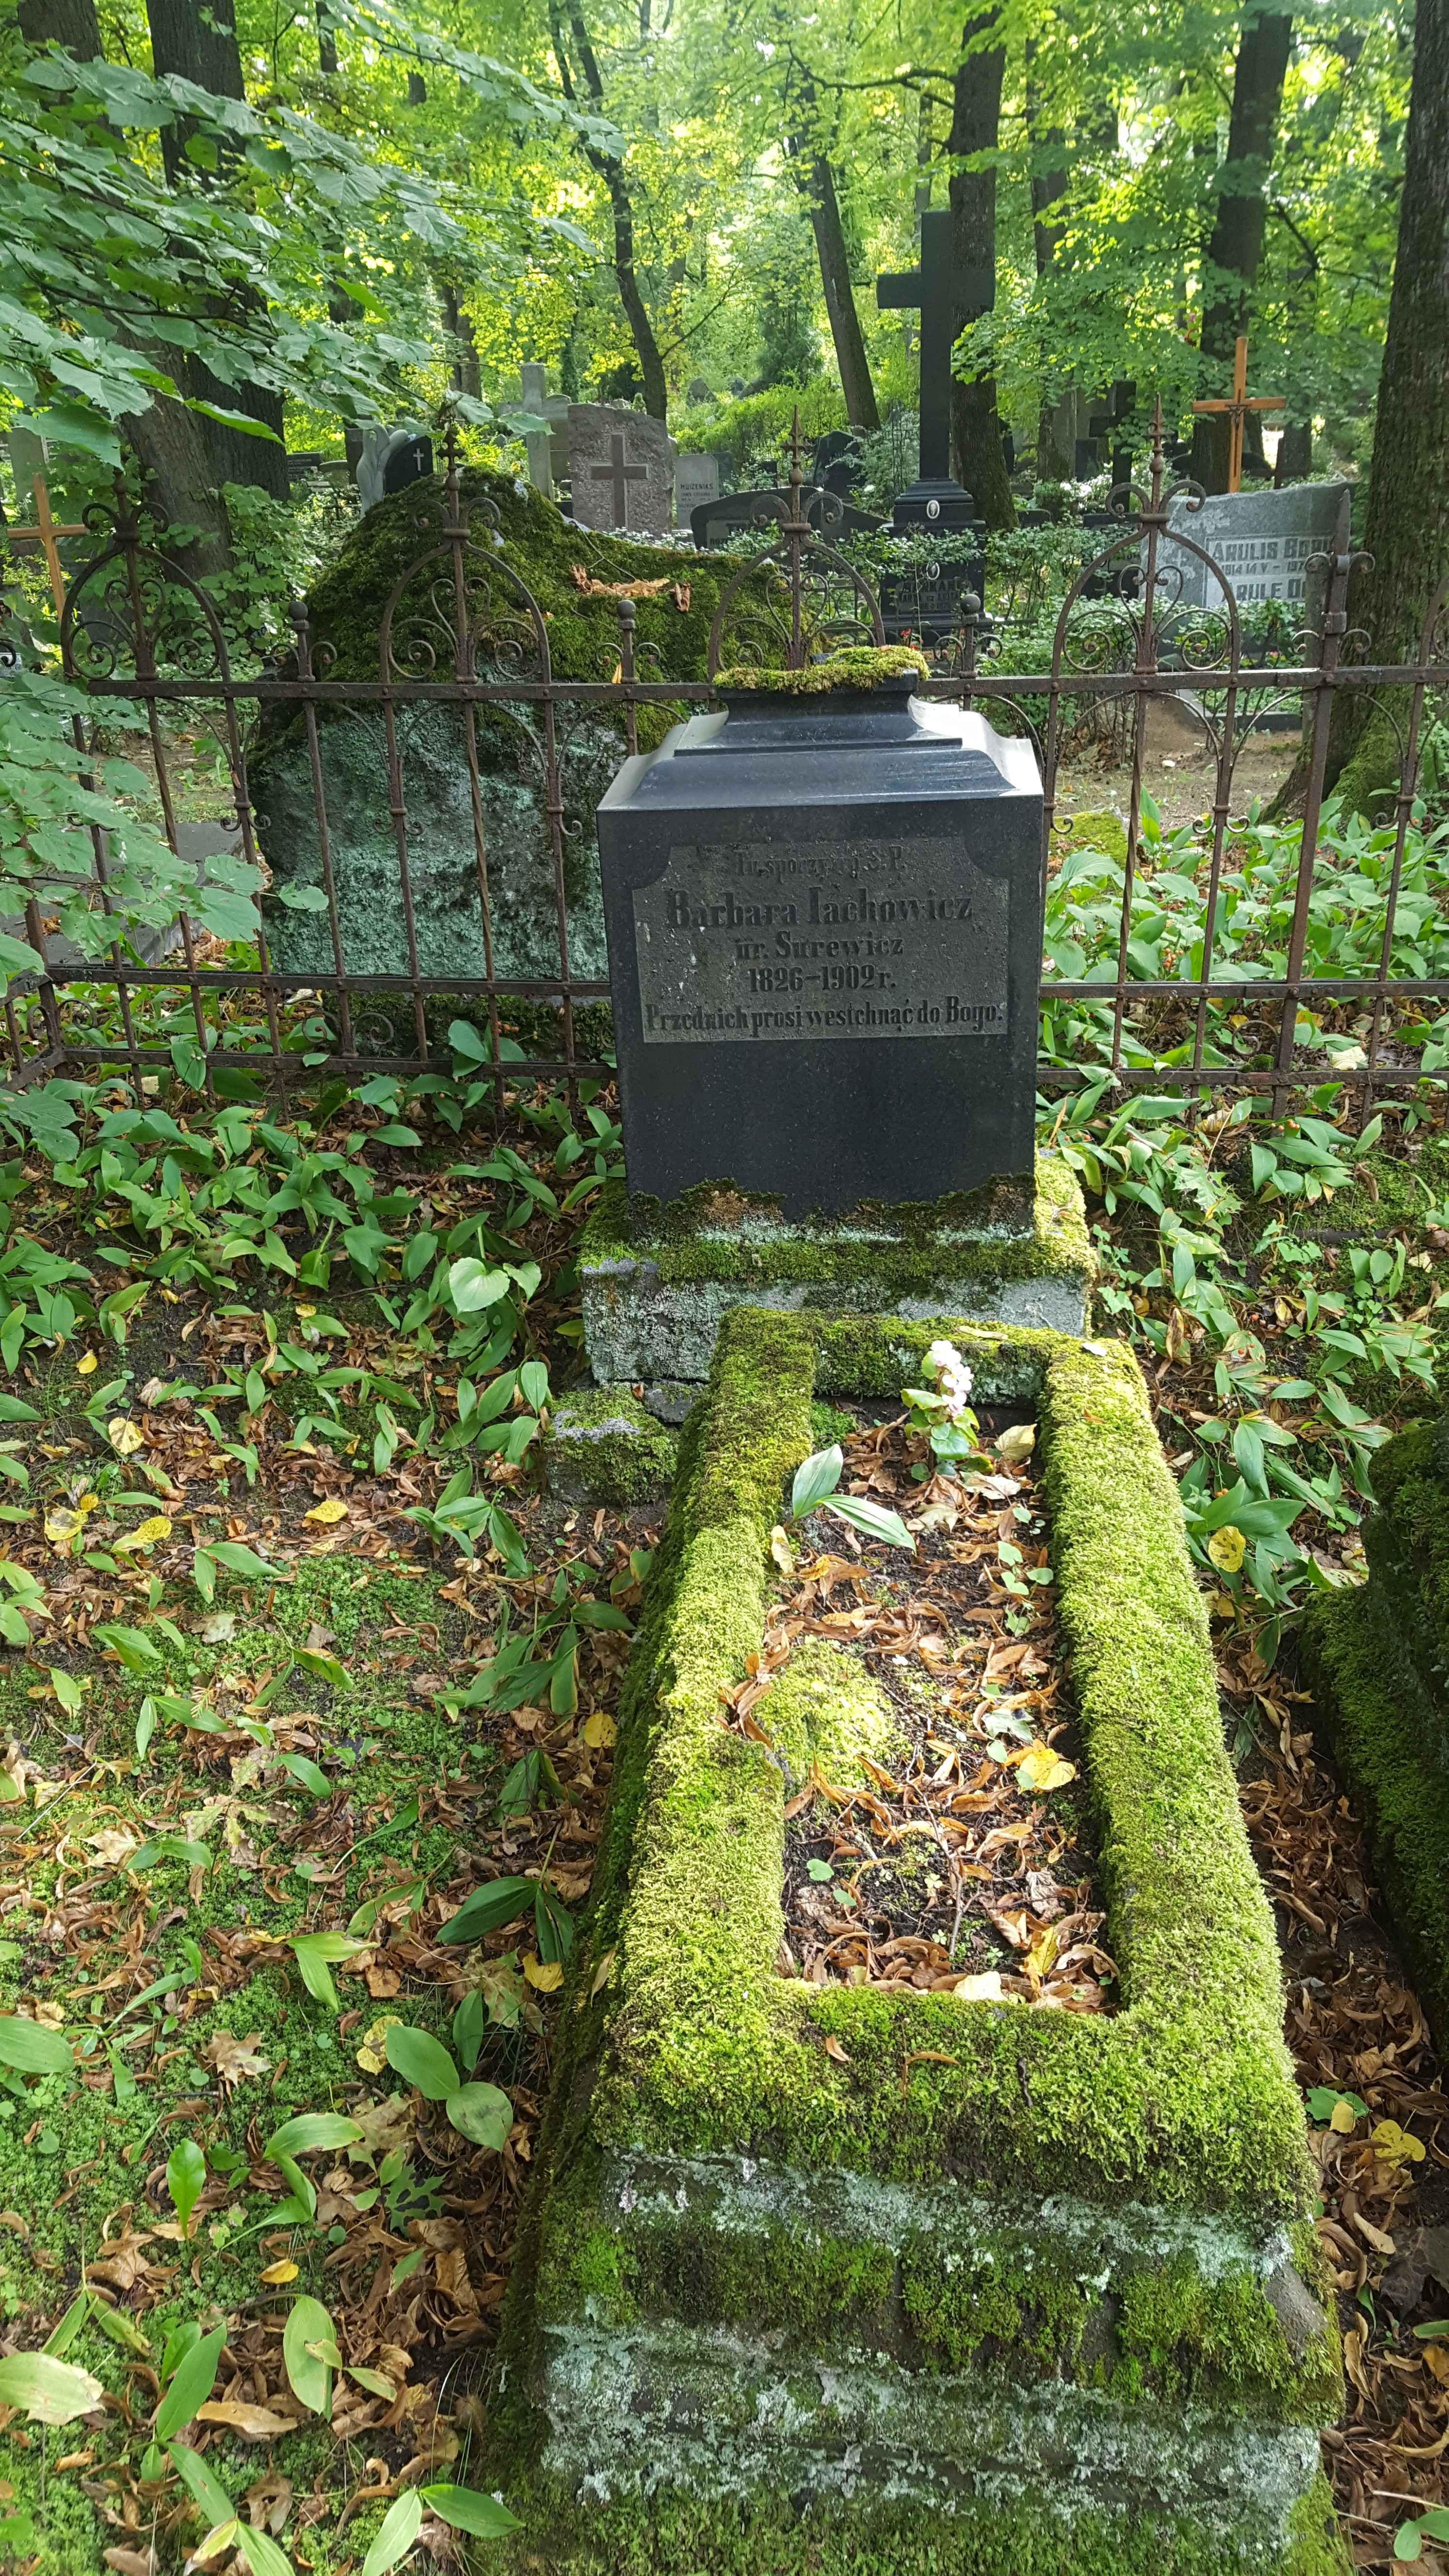 Tombstone of Barbara Lachowicz, St Michael's cemetery in Riga, as of 2021.